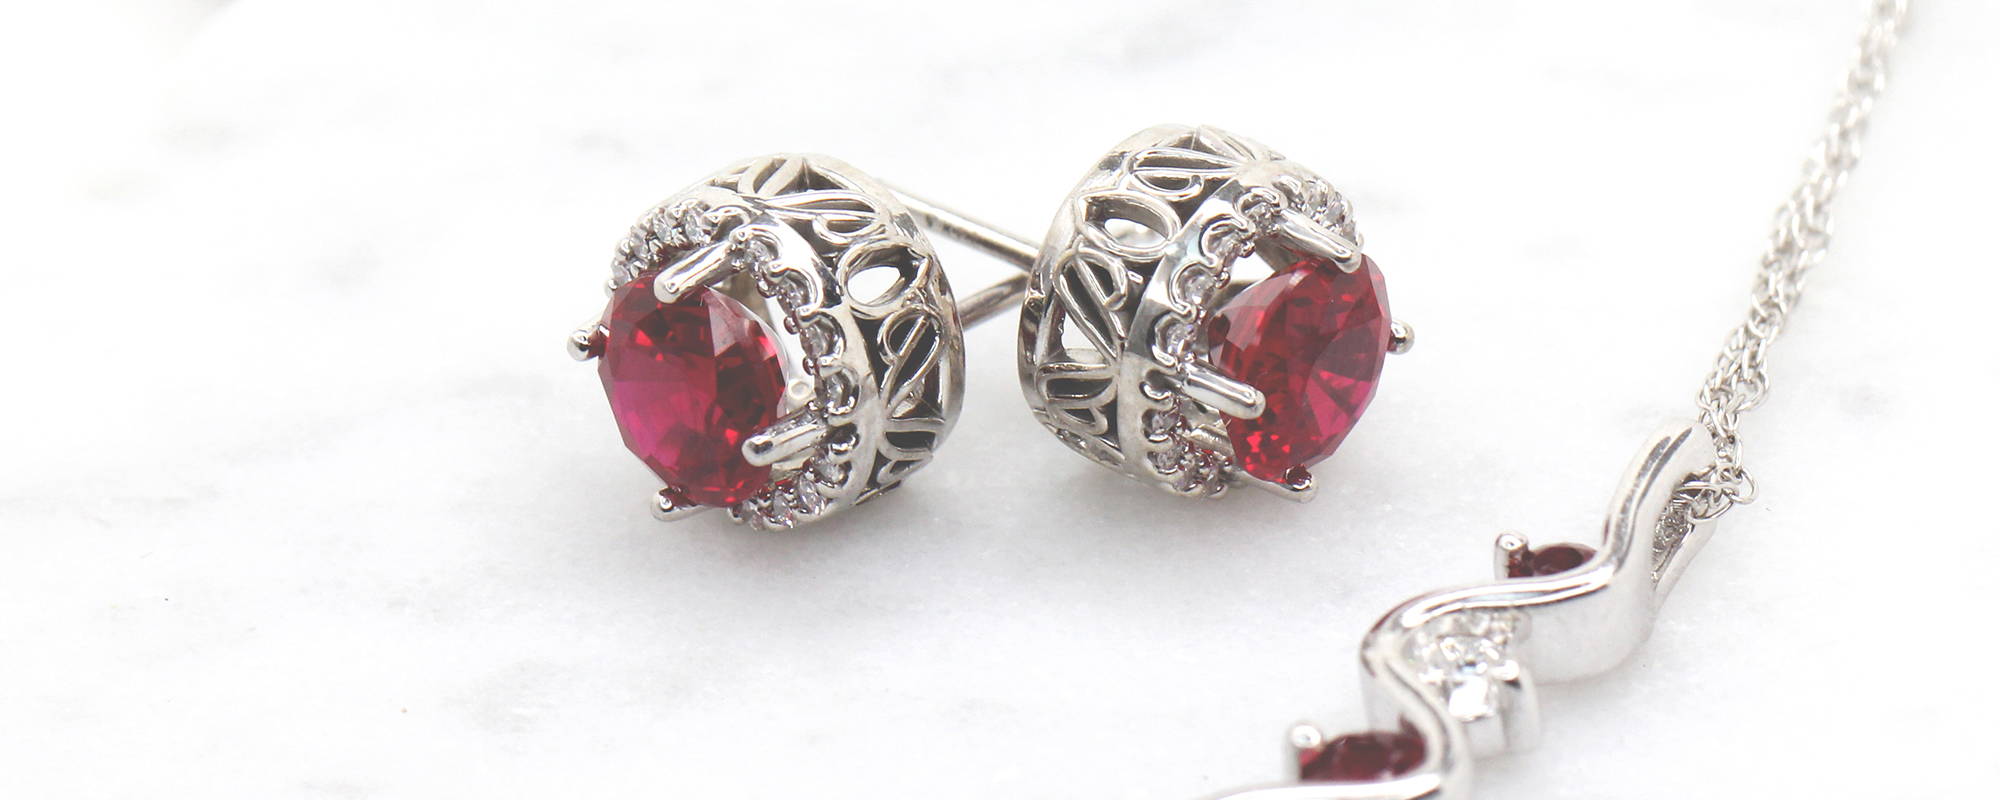 15 Fun Facts About Rubies, July's Birthstone